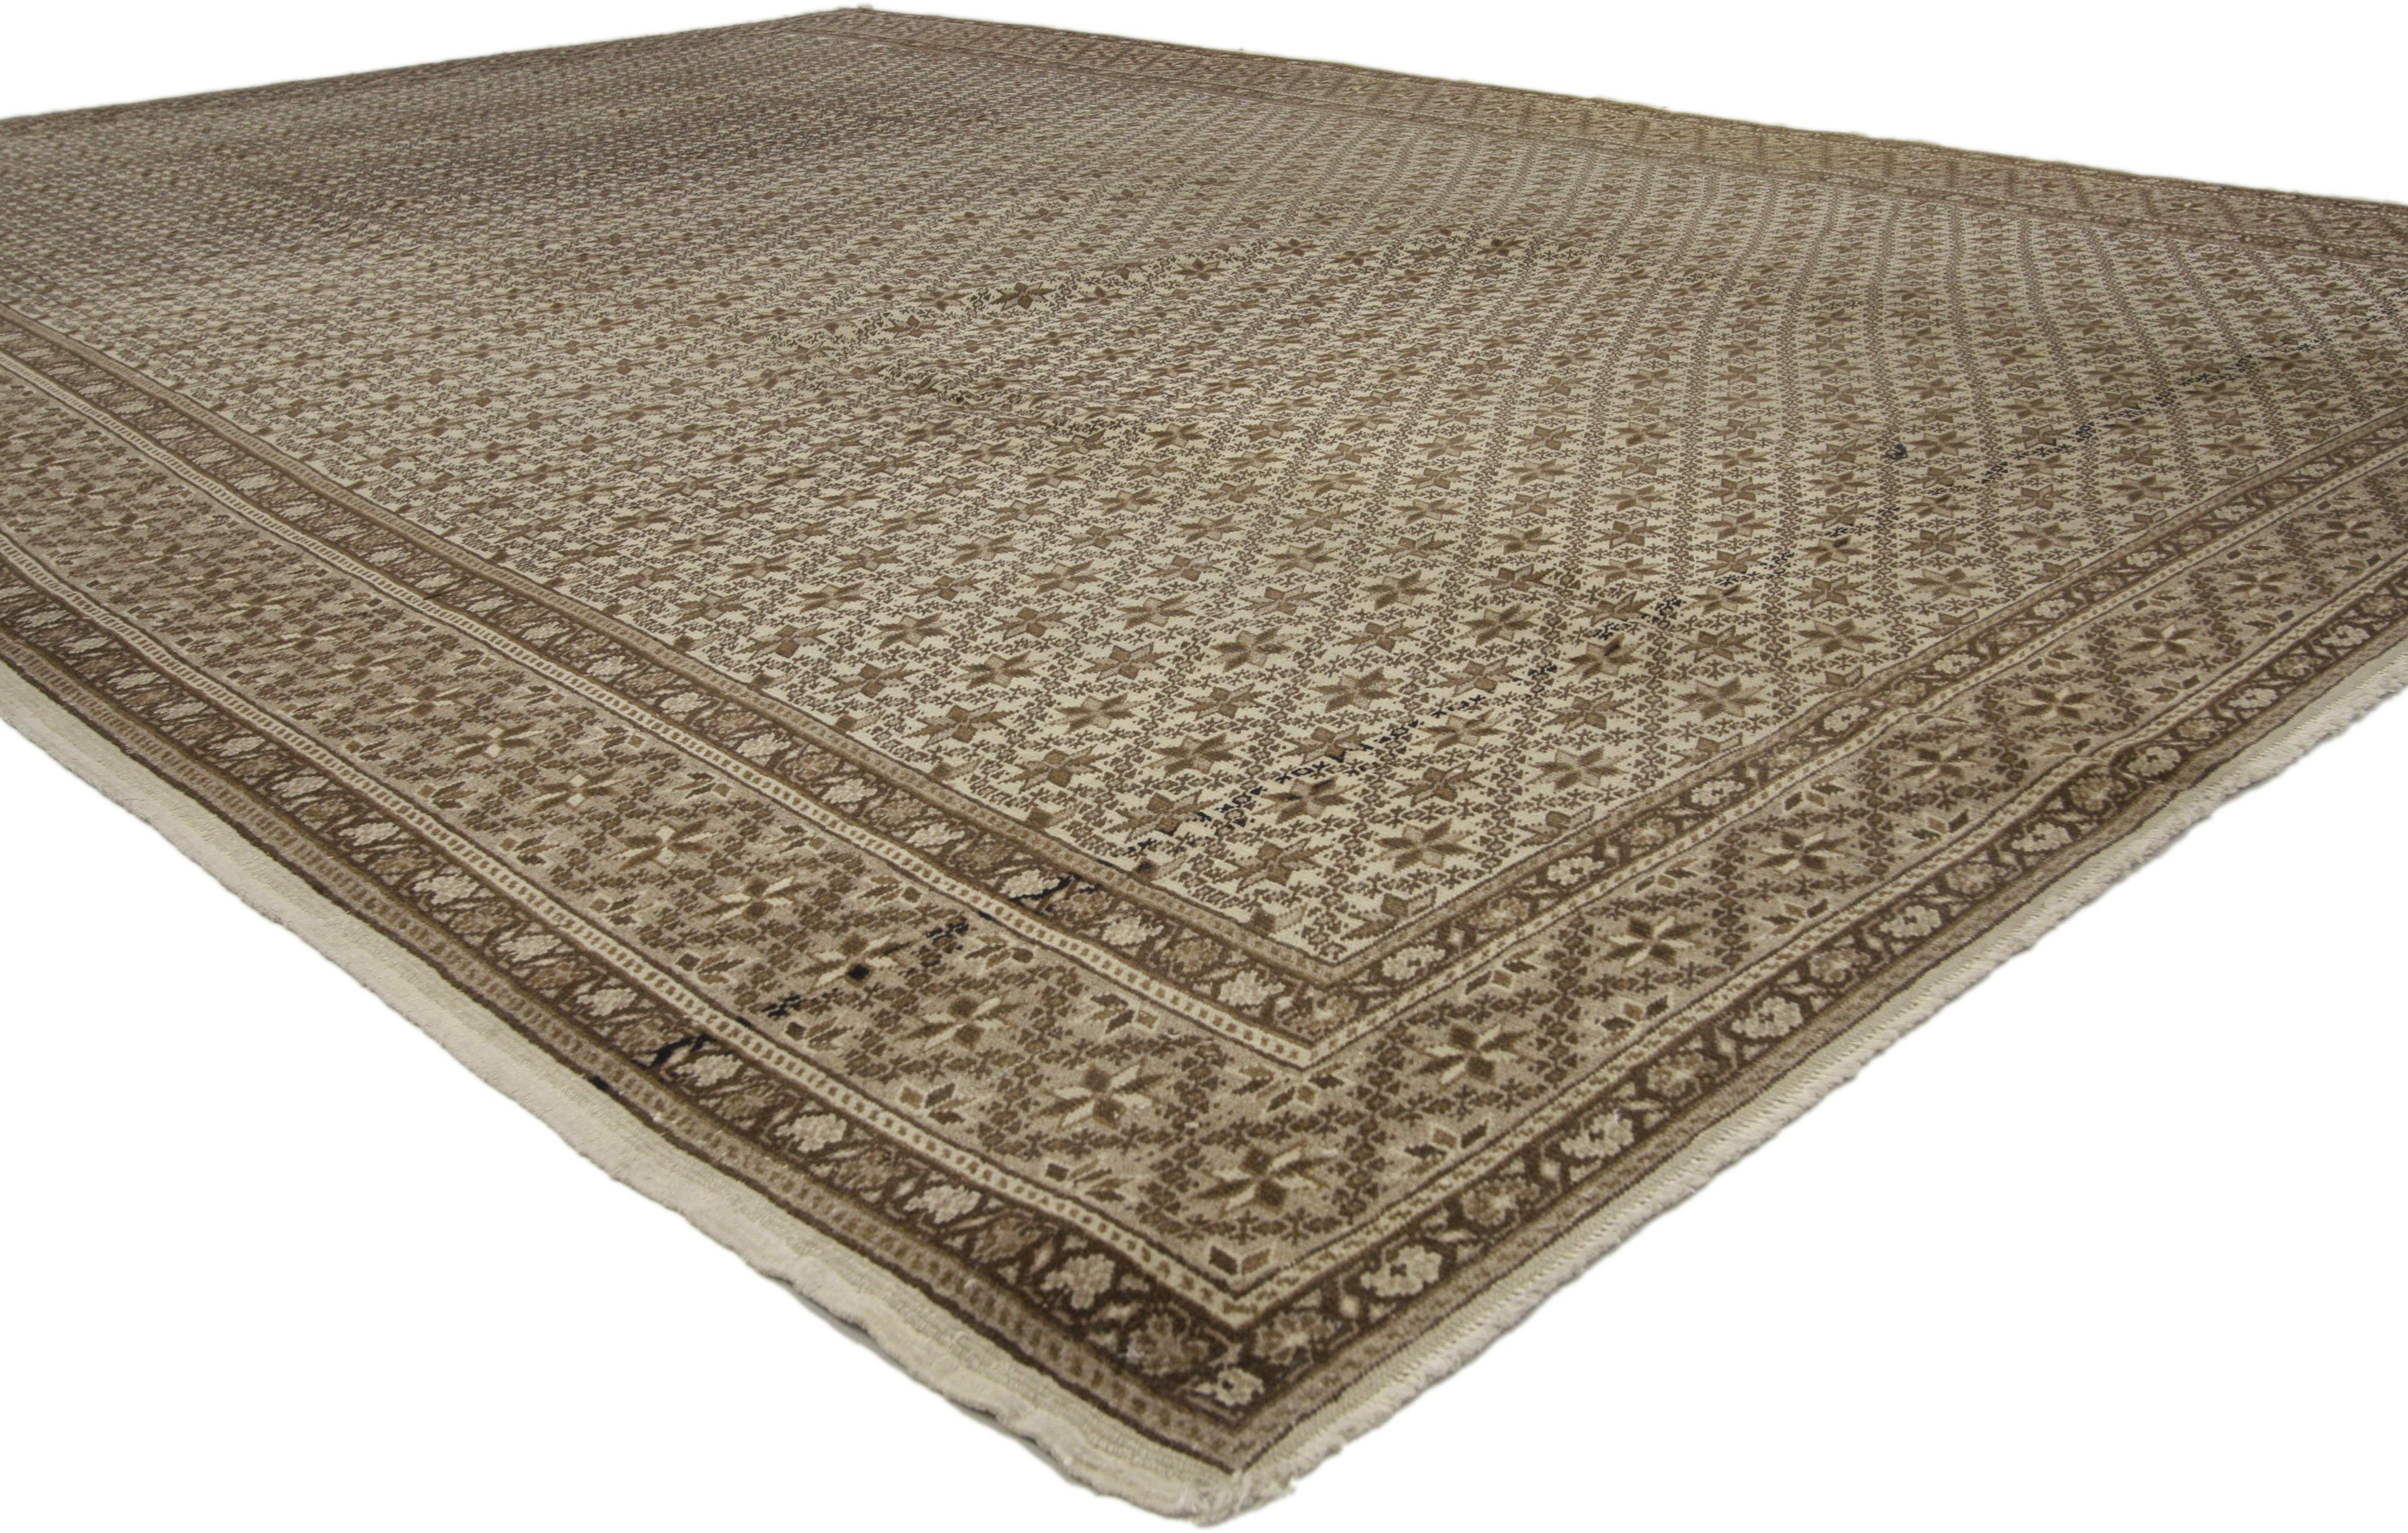 72683 Vintage Turkish Sivas Rug with Warm, Neutral Colors and Colonial Style 06'06 X 09'07. This hand knotted wool antique-washed vintage Turkish Sivas rug features an all-over diamond lattice pattern overlaid across an abrashed beige field. Each